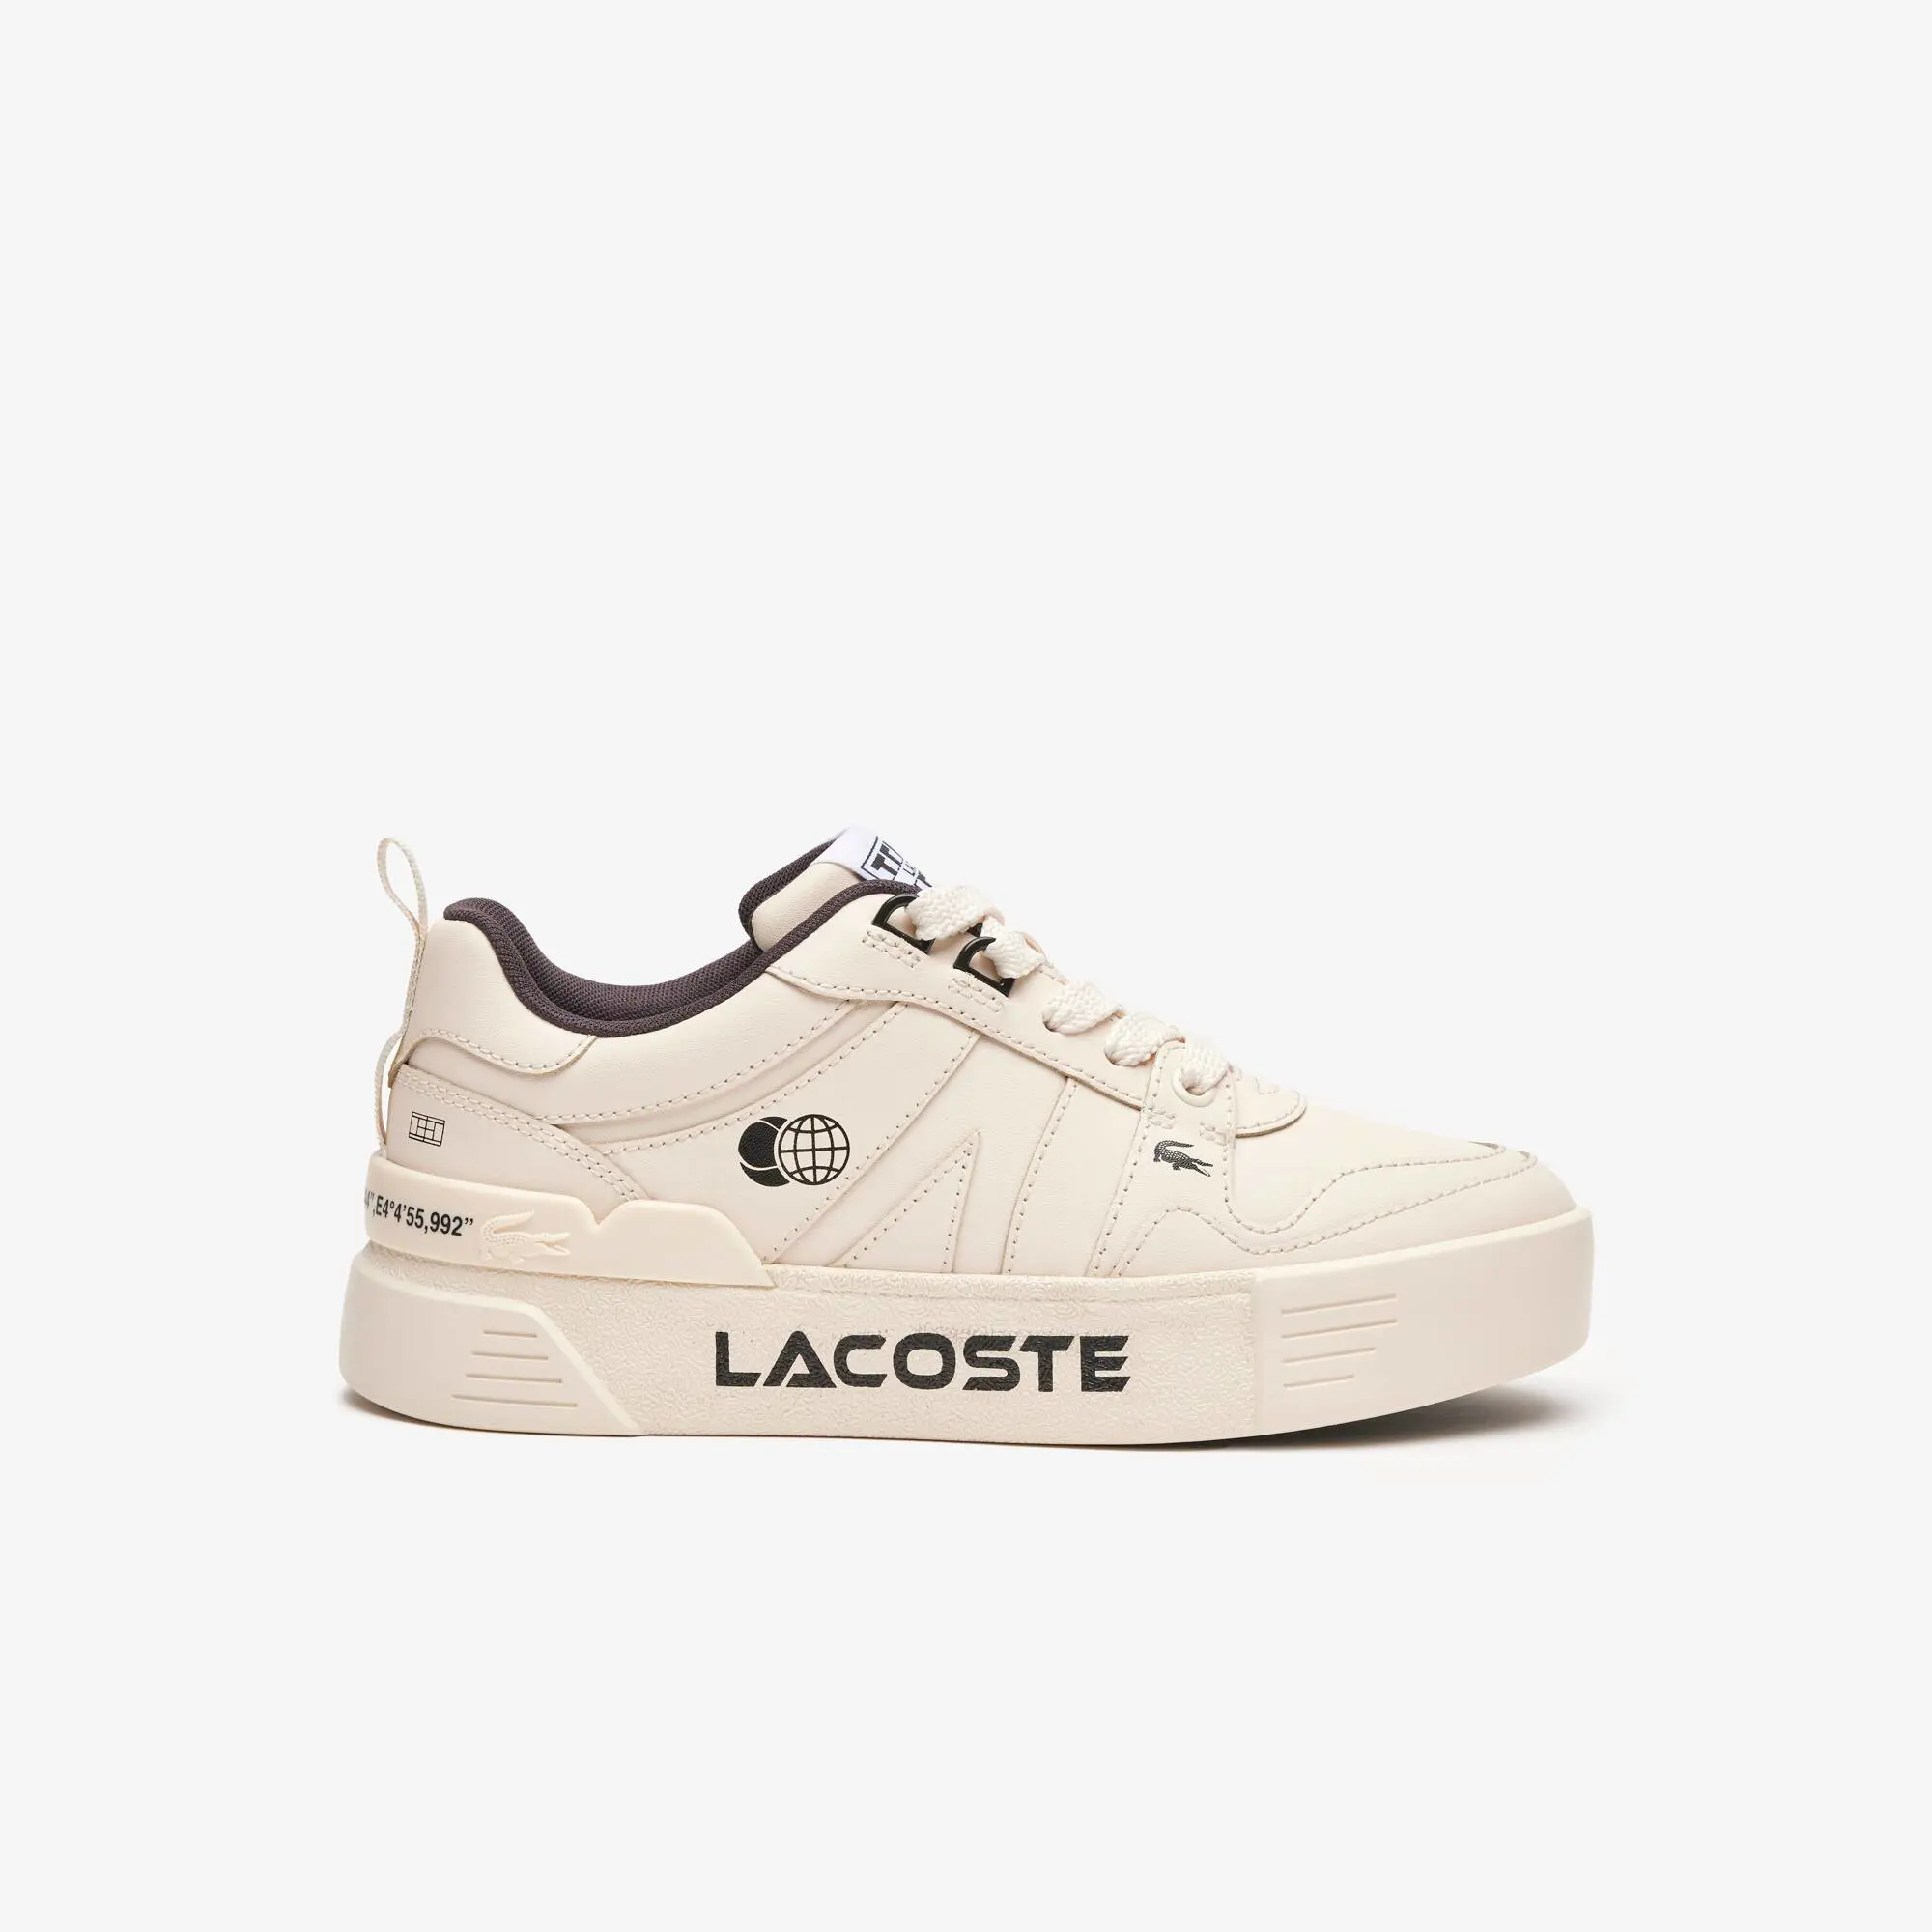 Lacoste Women’s Branded Leather L002 Trainers. 1